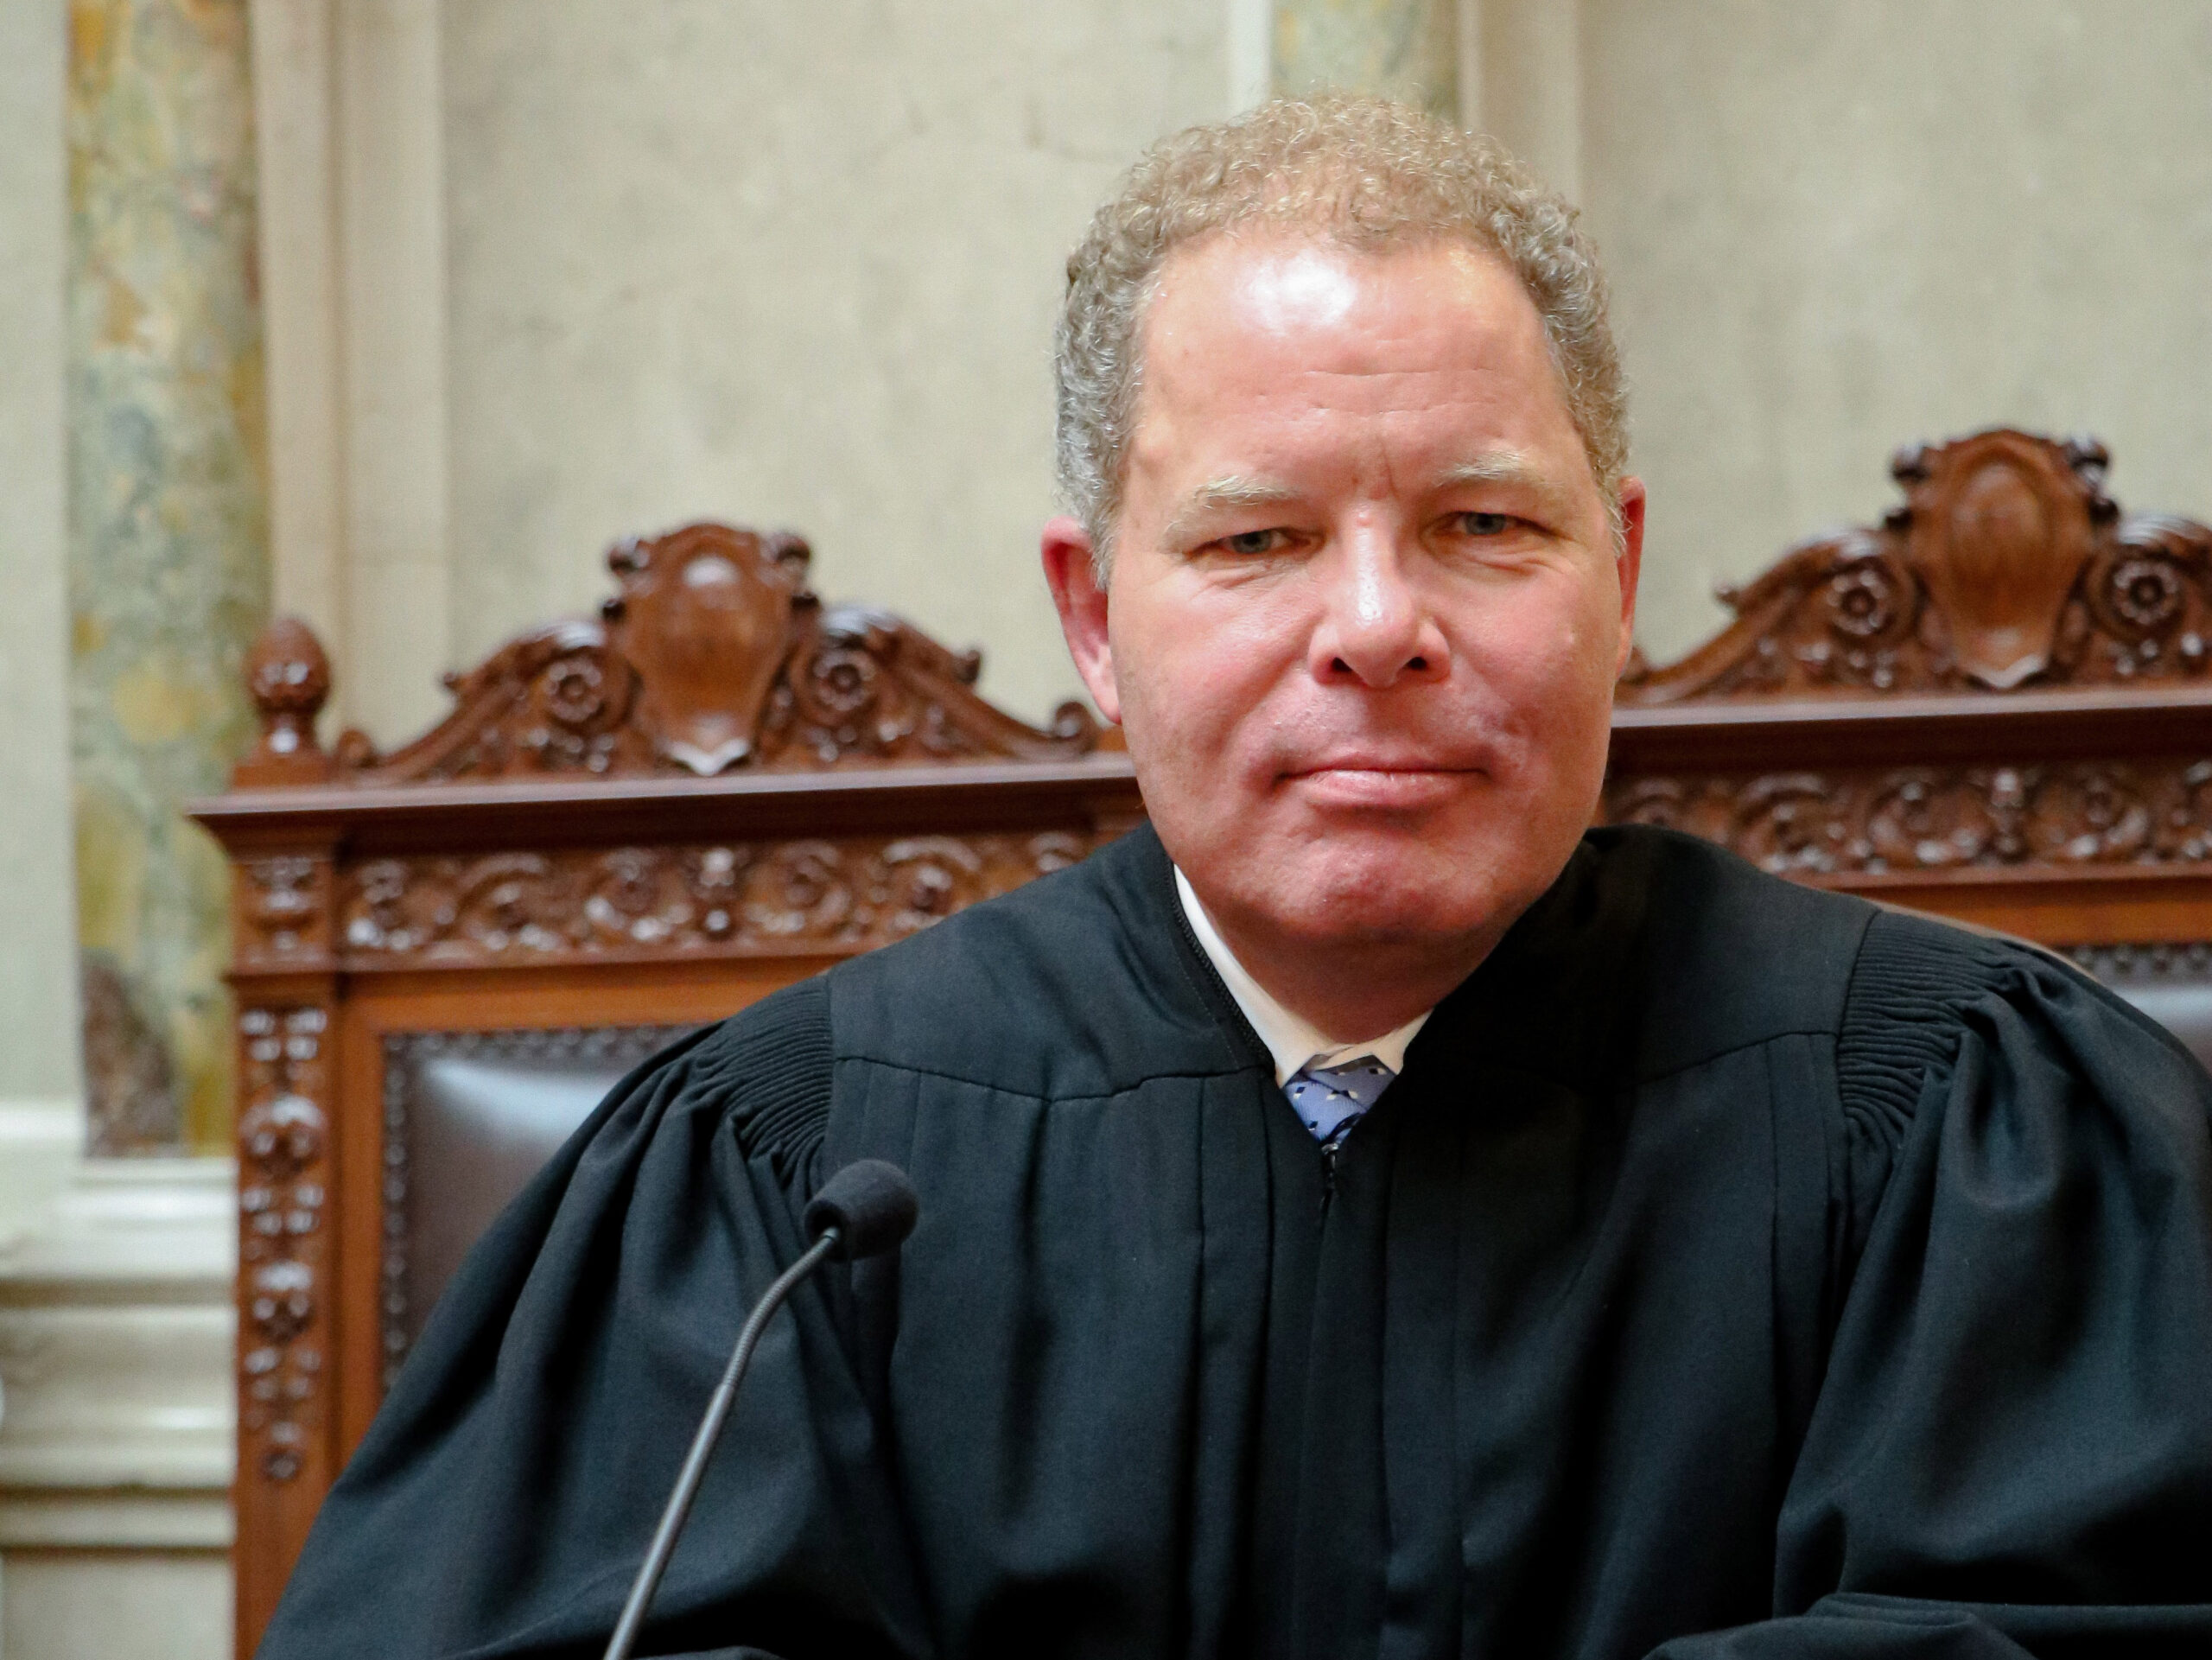 Daniel Kelly wants to be ‘most boring’ Wisconsin Supreme Court justice